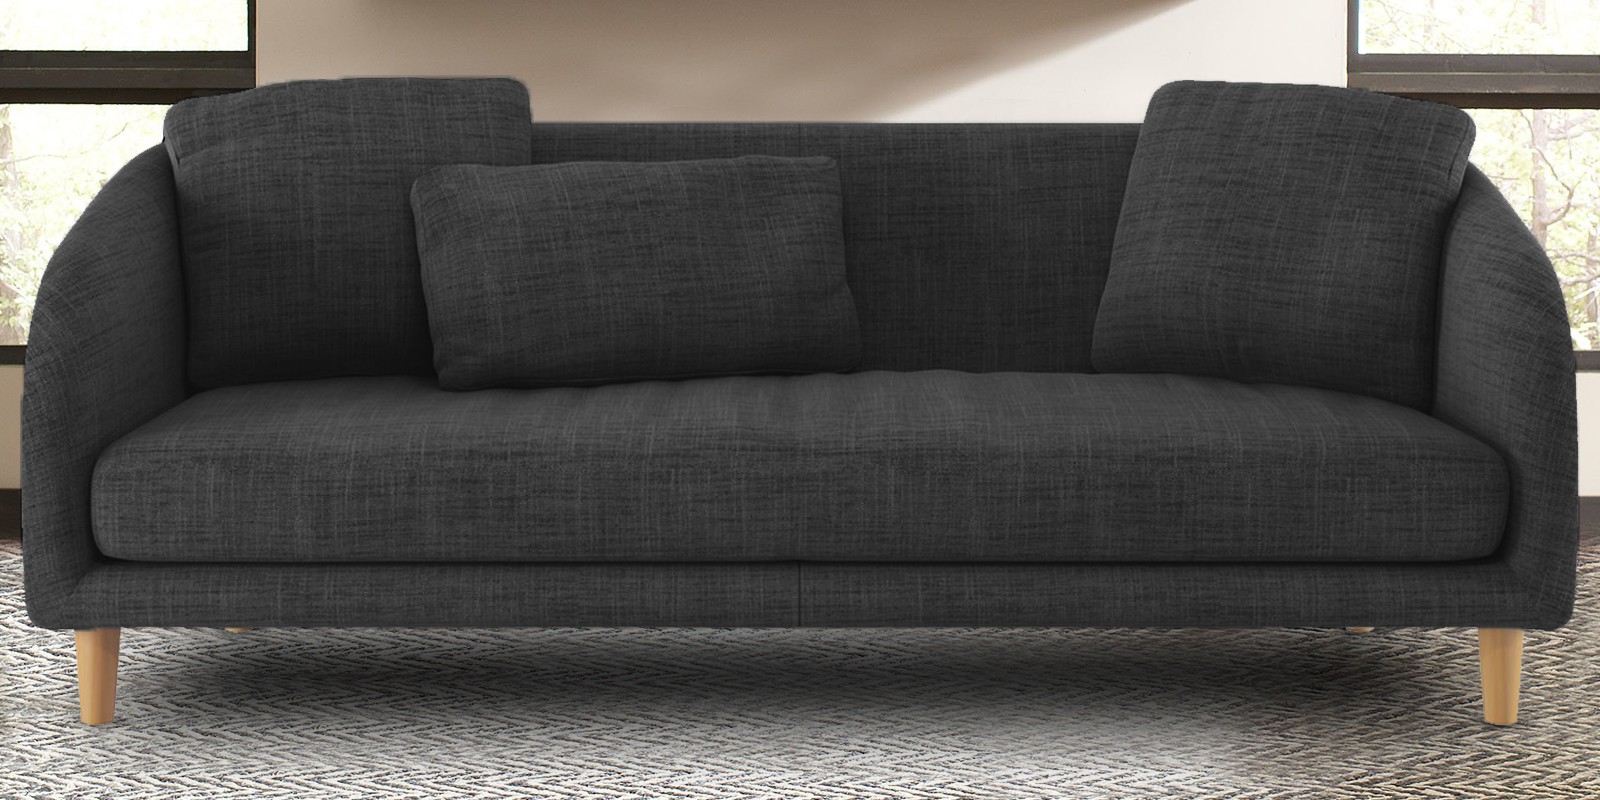 Wisely Fabric 3 Seater Sofa In Dark